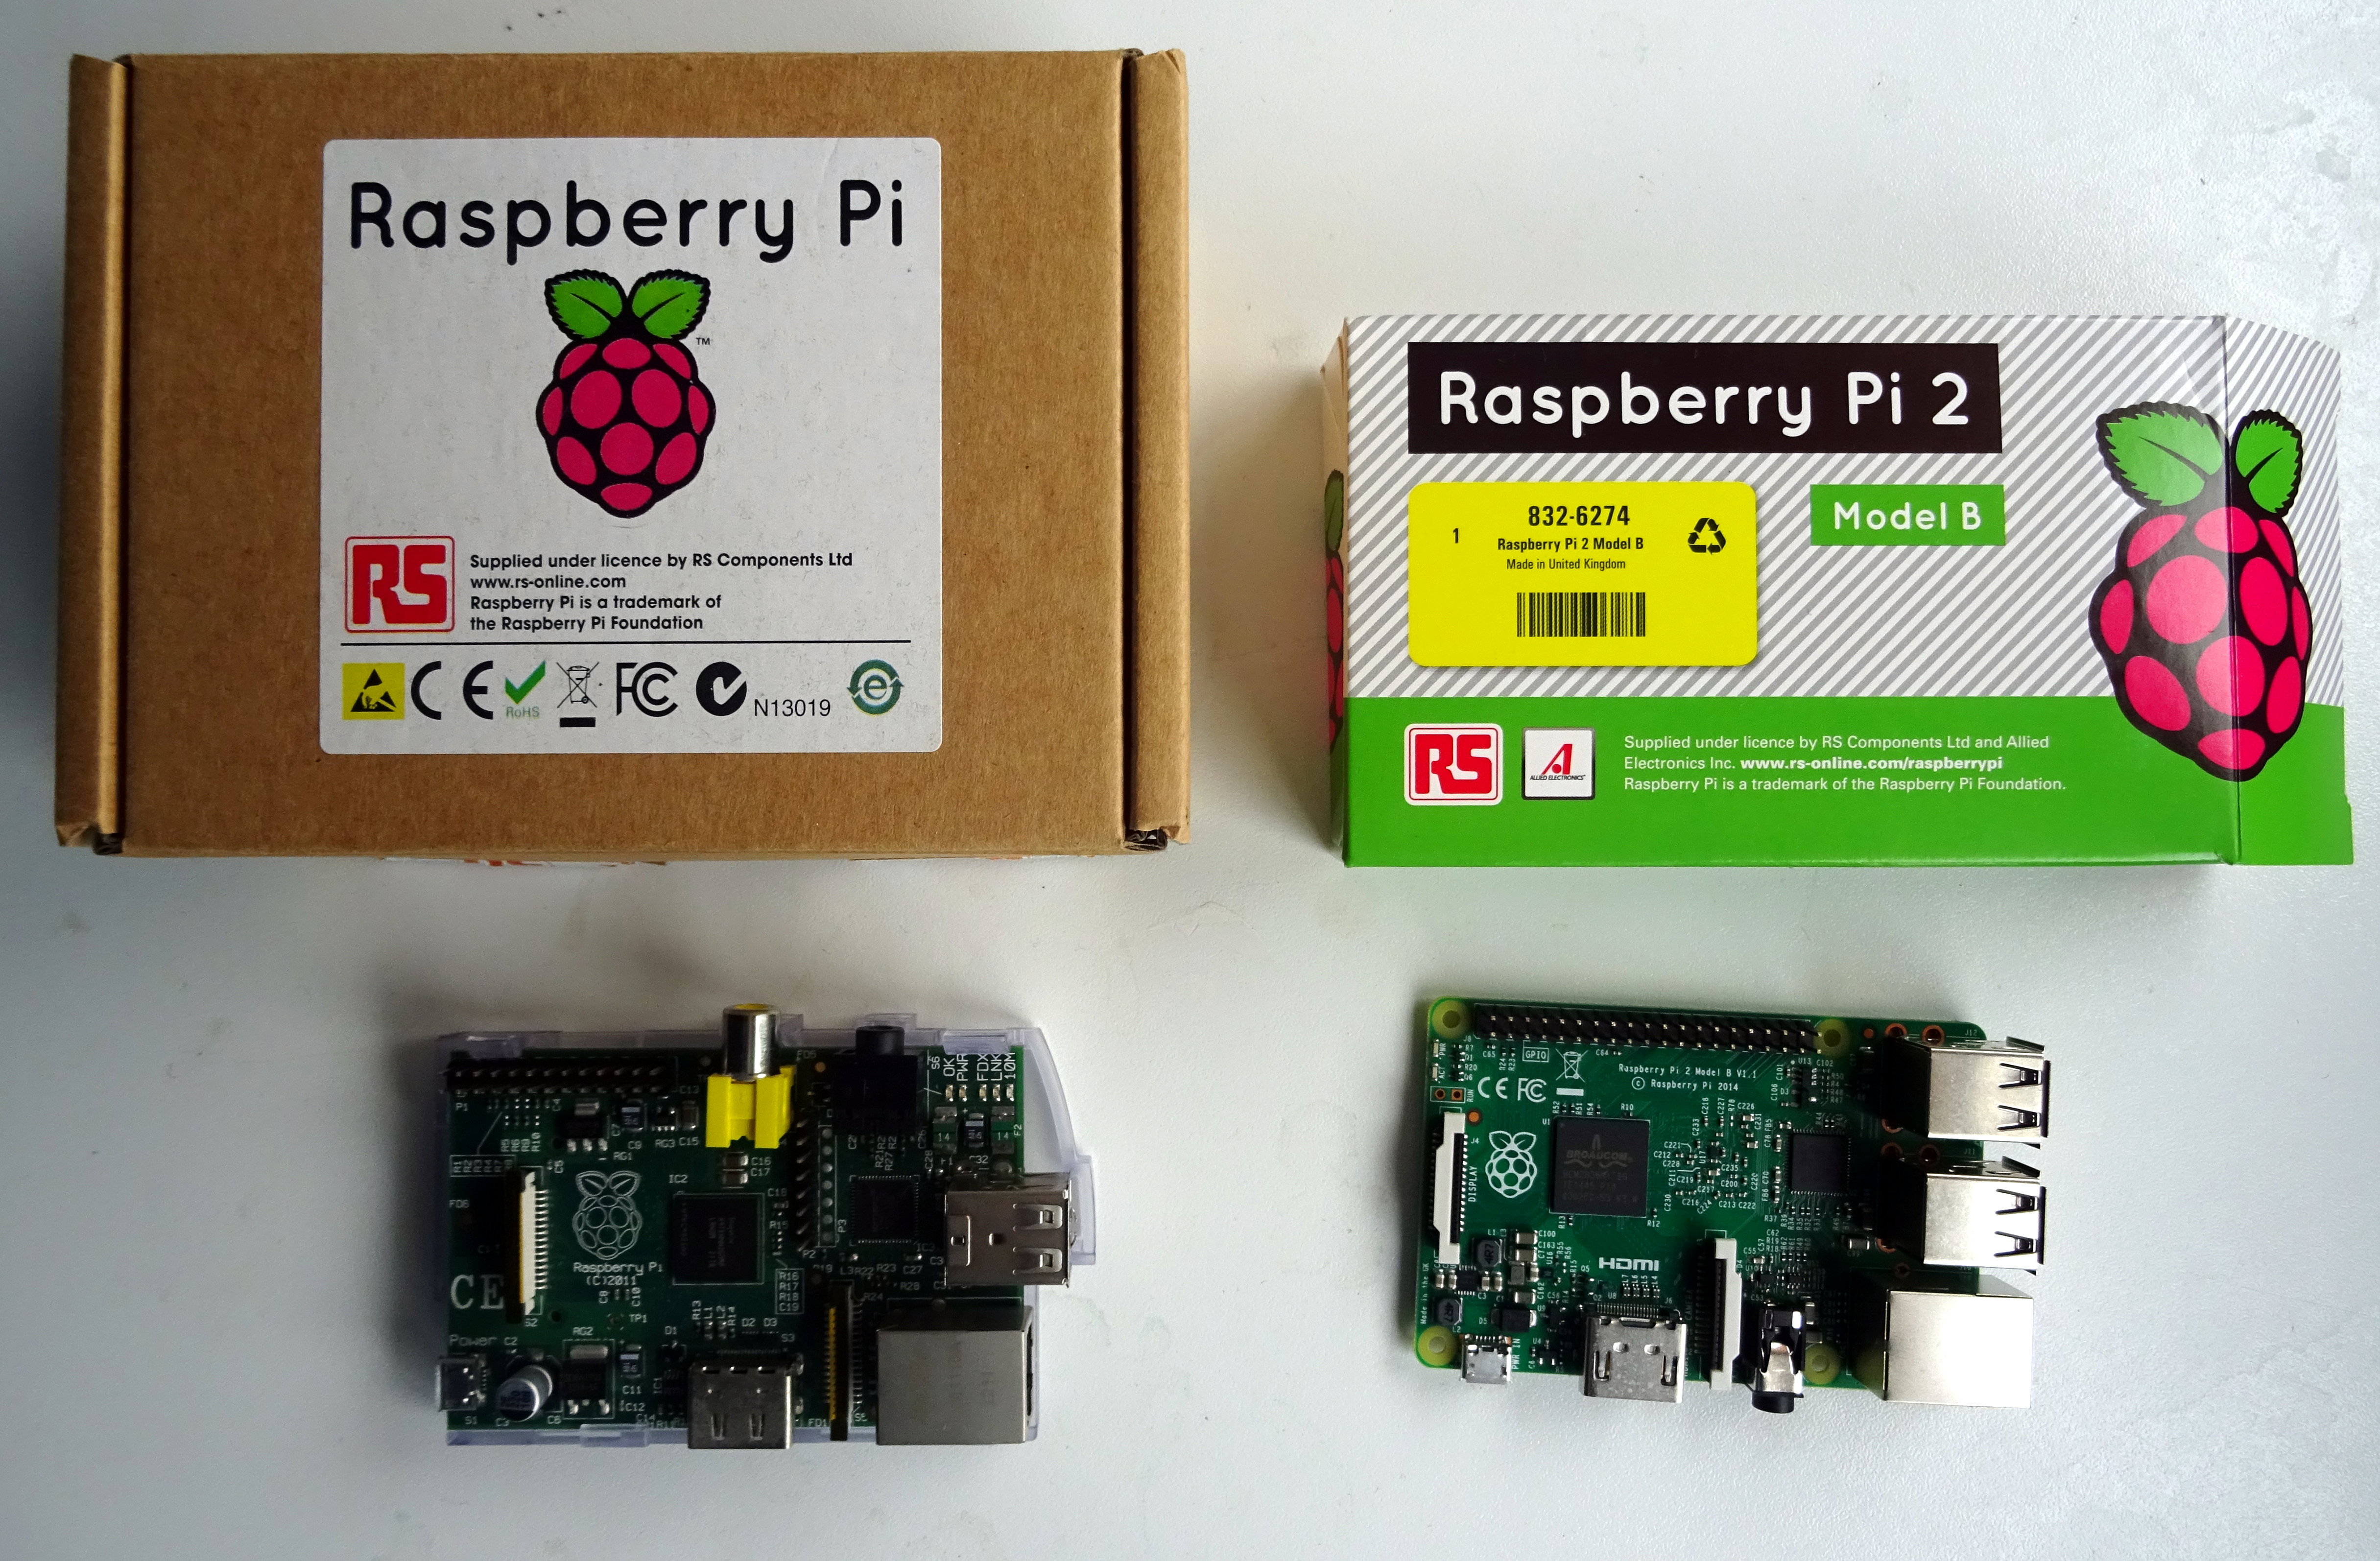 Two Raspberry Pi's, both alike in dignity